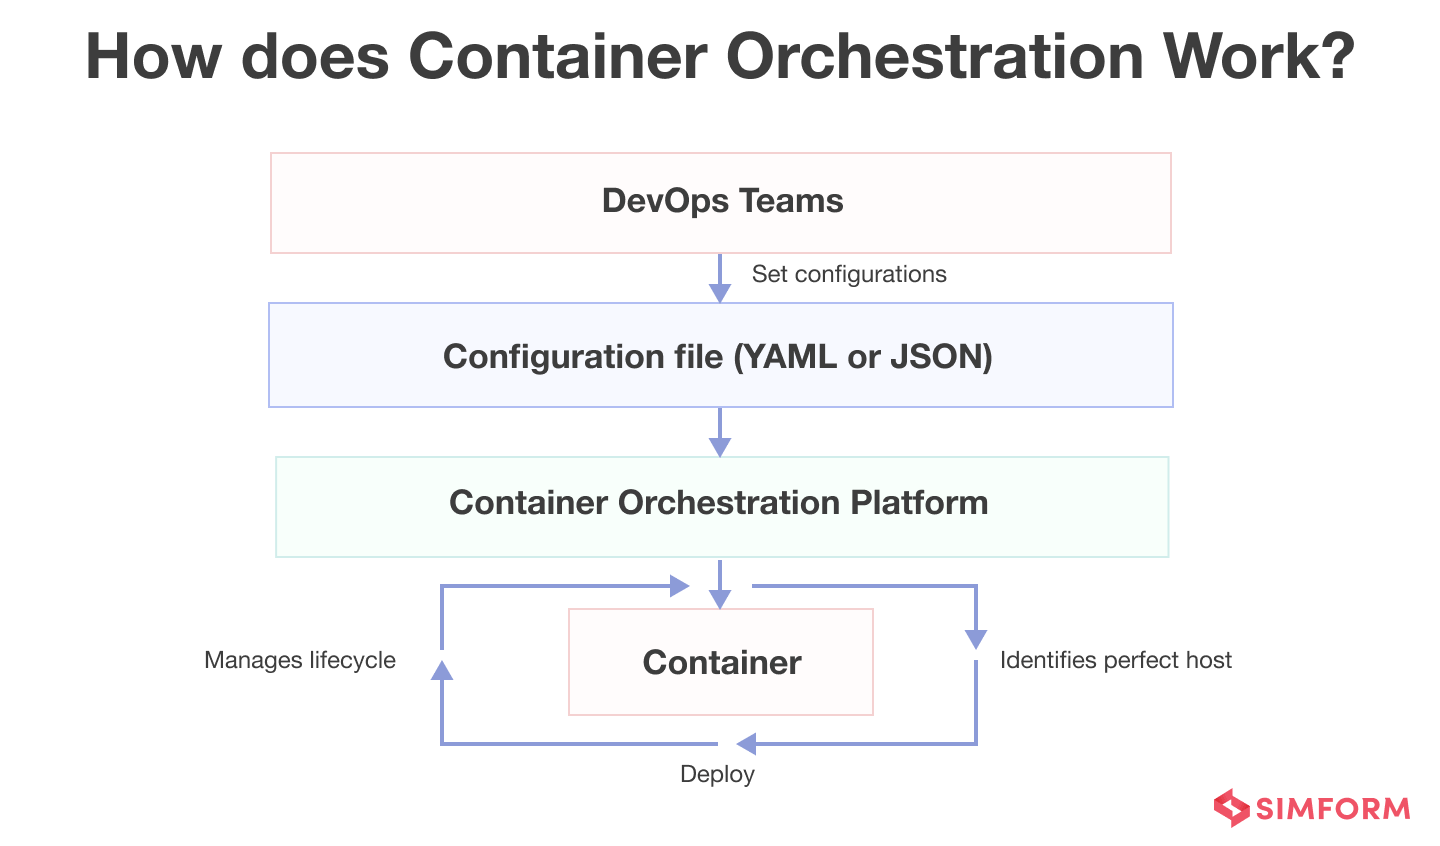 How does Container Orchestration Work